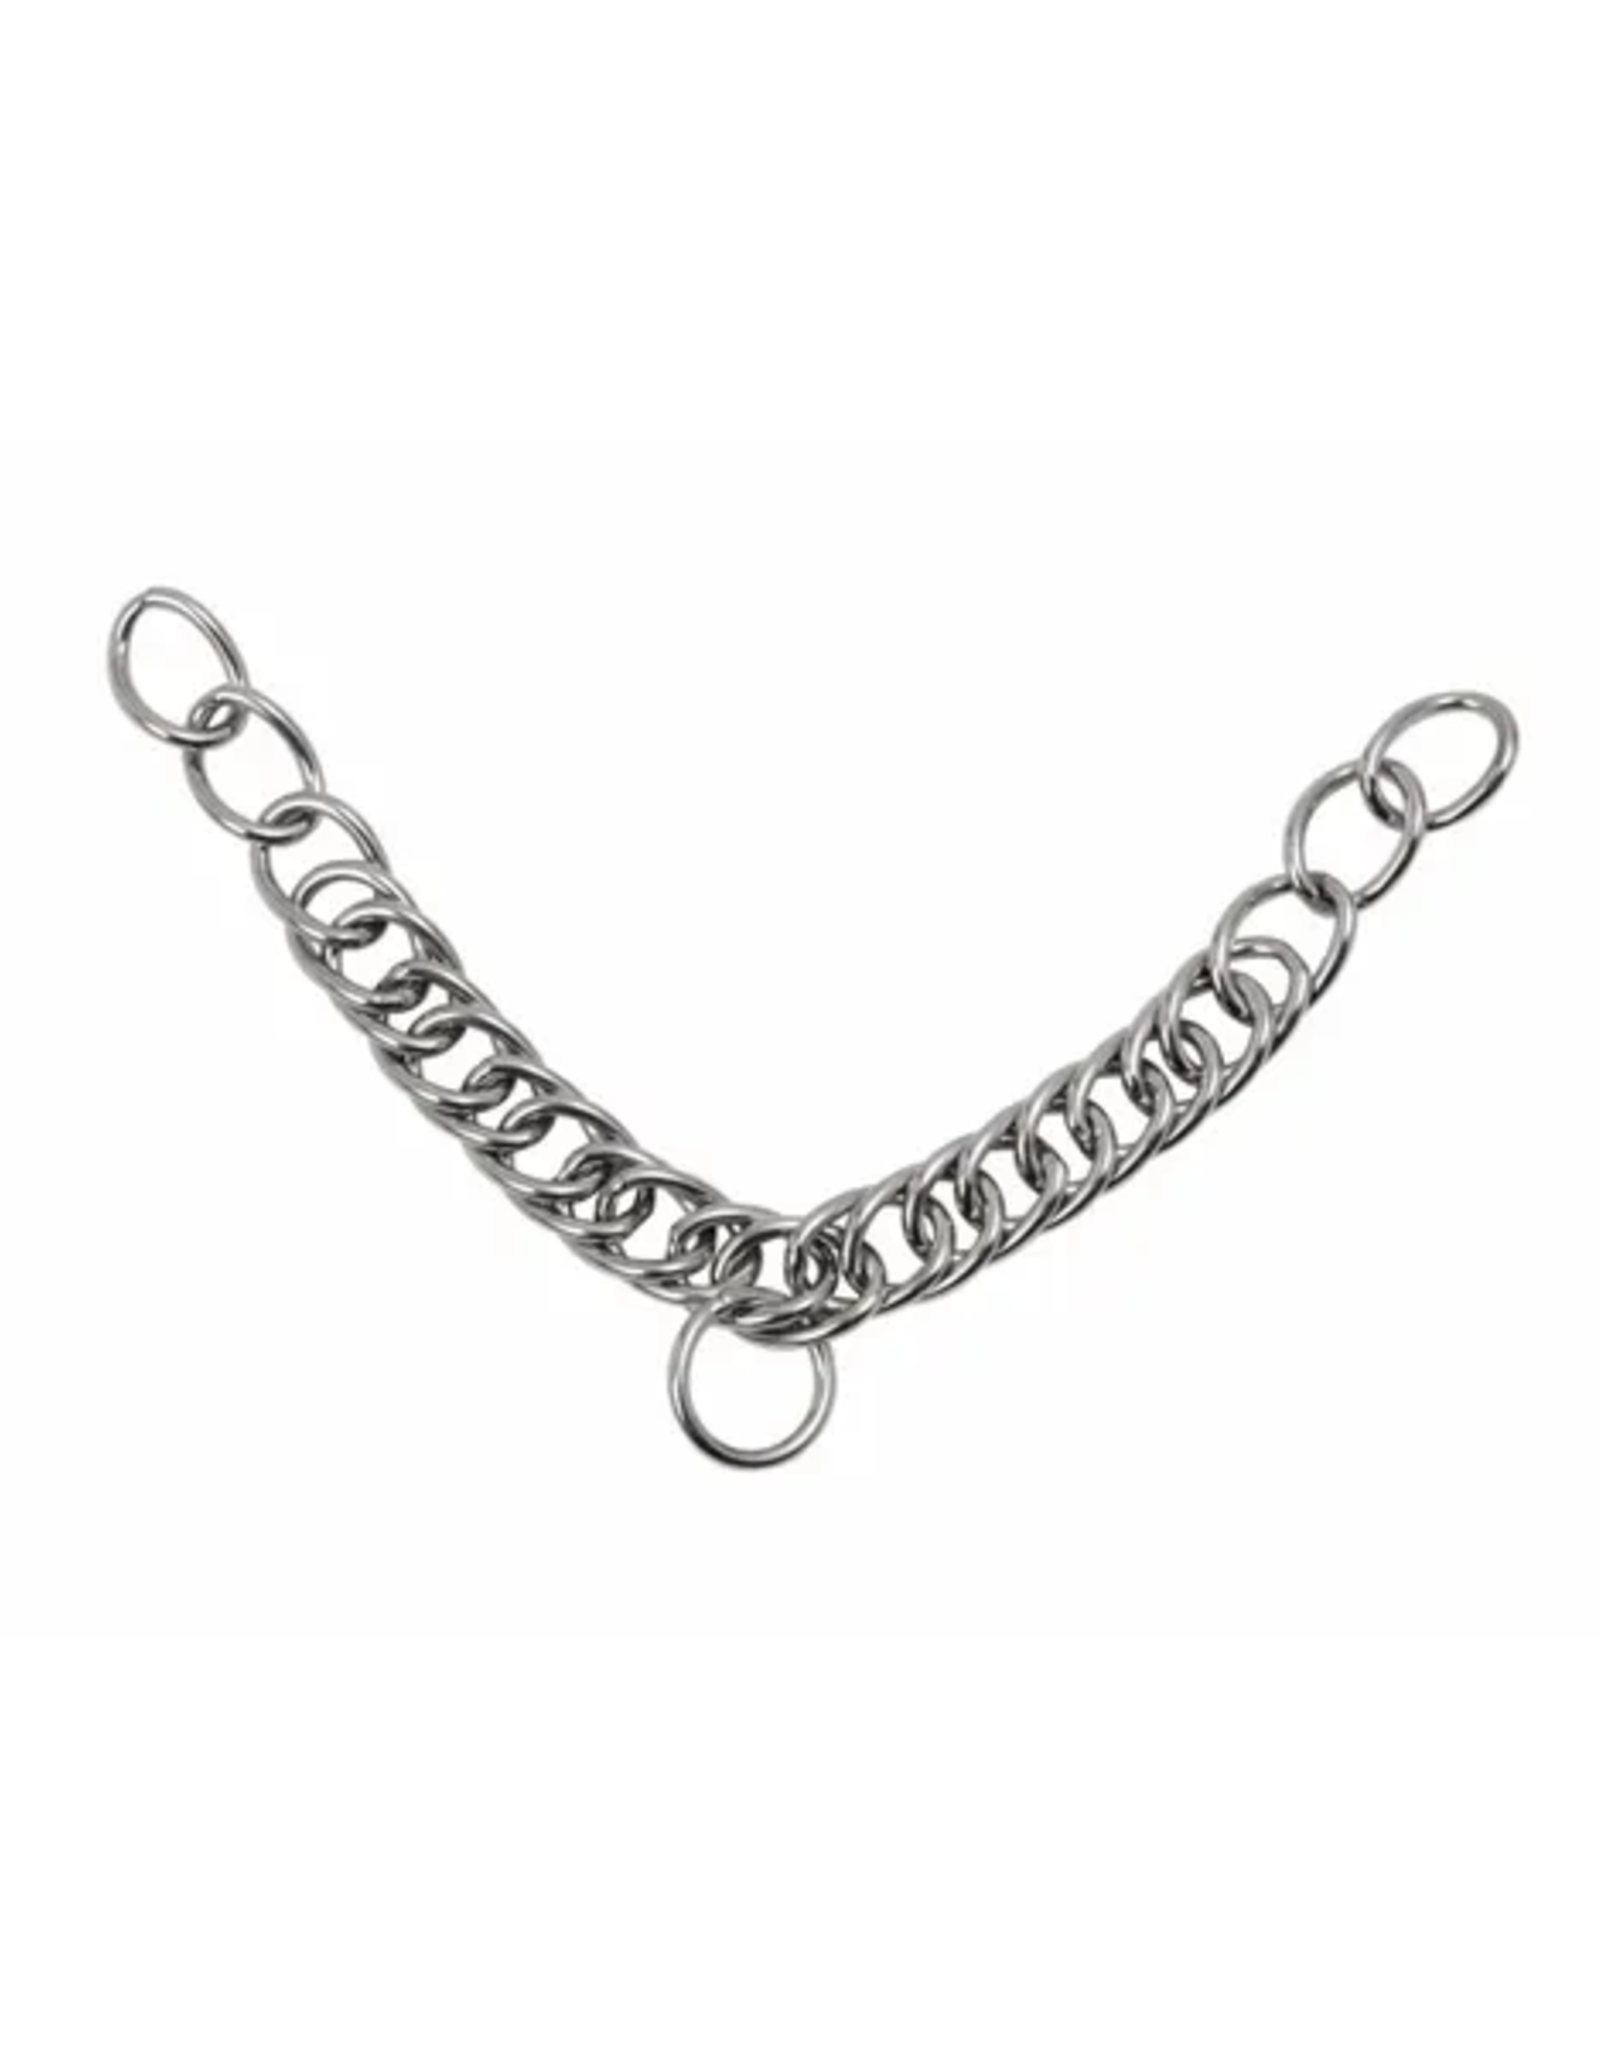 SHIRES DOUBLE LINK CURB CHAIN